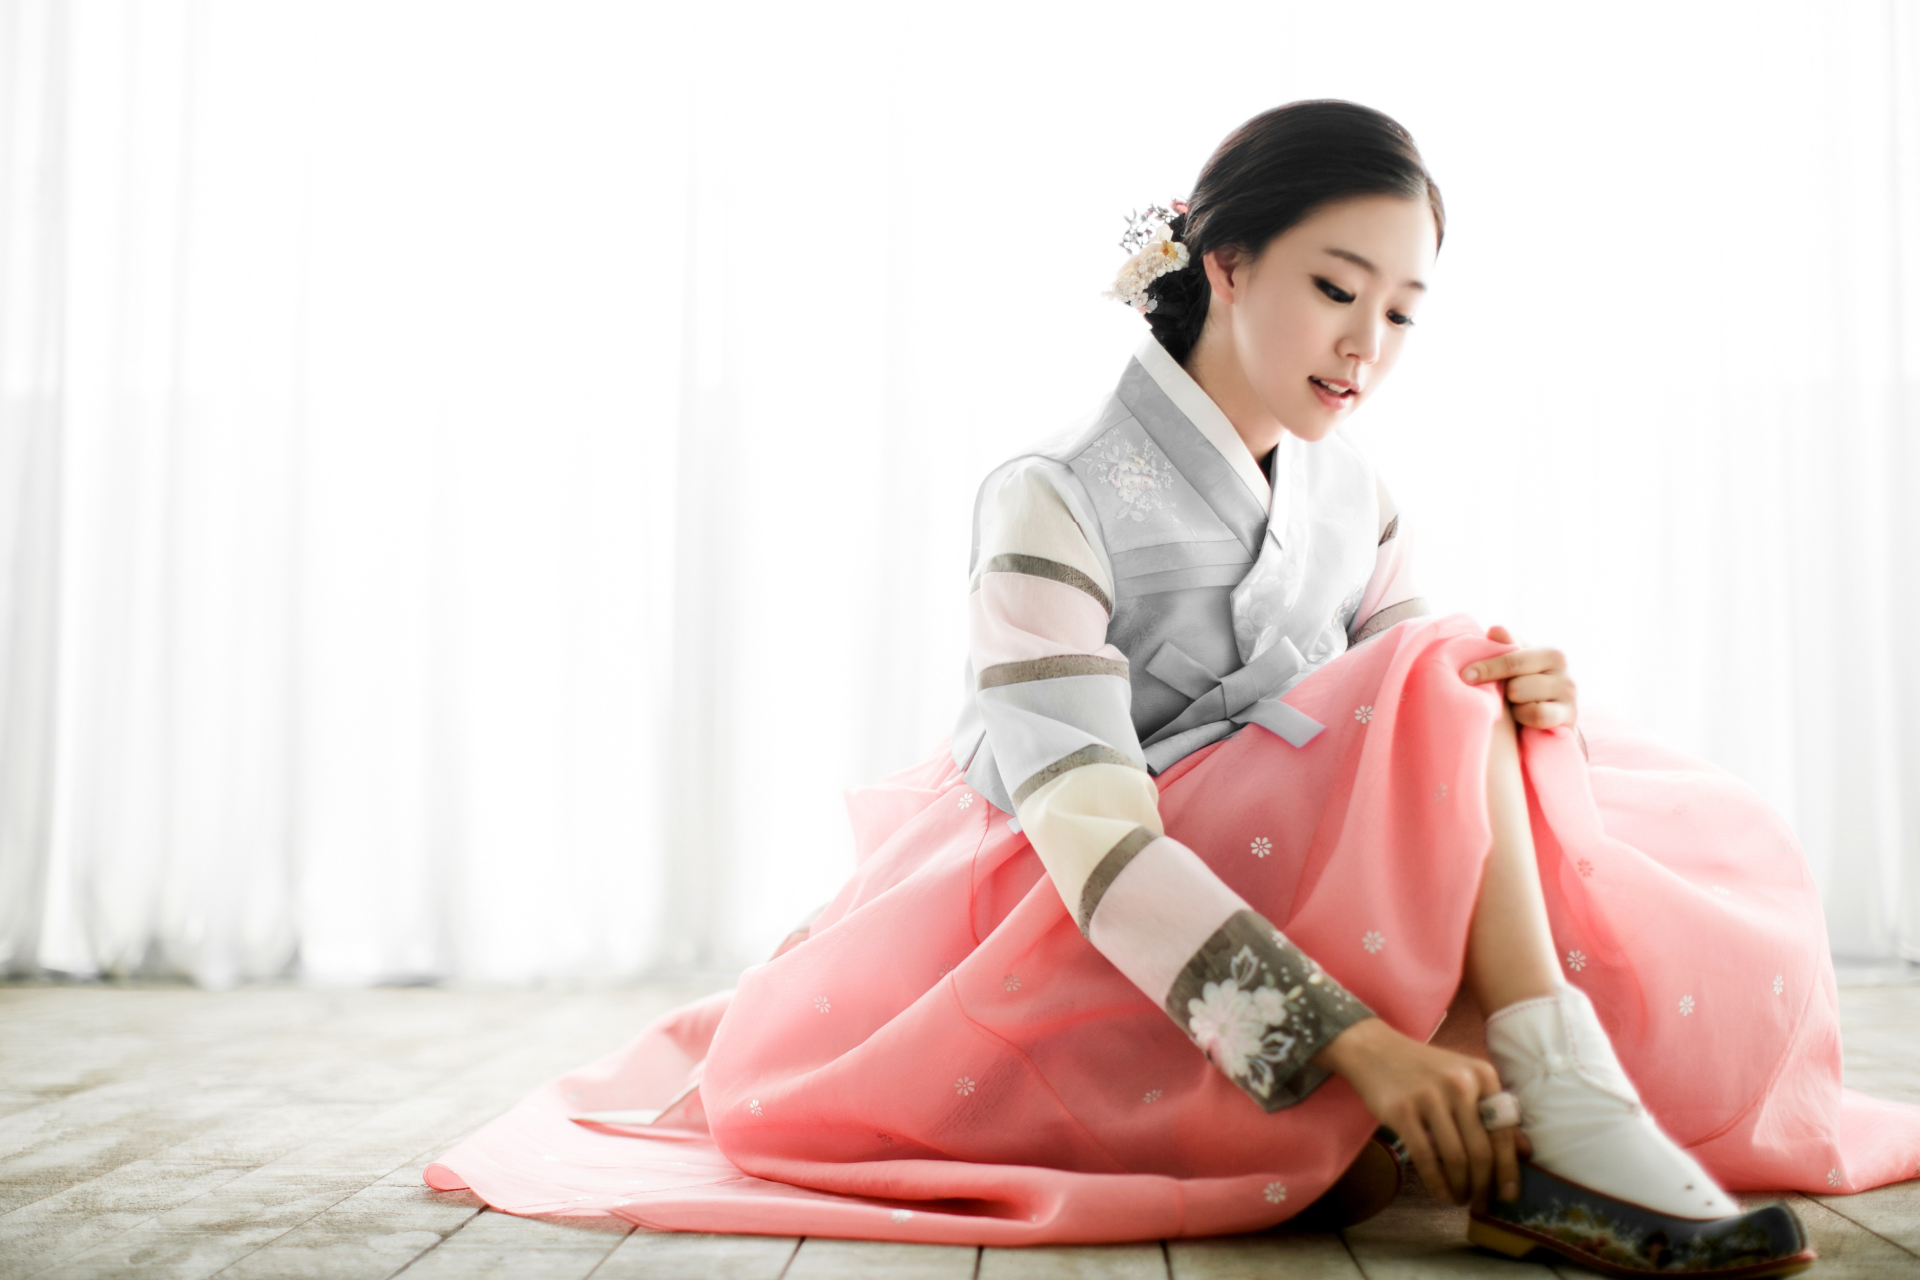 People 1920x1280 South Korea women Asian hanbok sitting wooden surface model parted lips women indoors indoors studio white background simple background